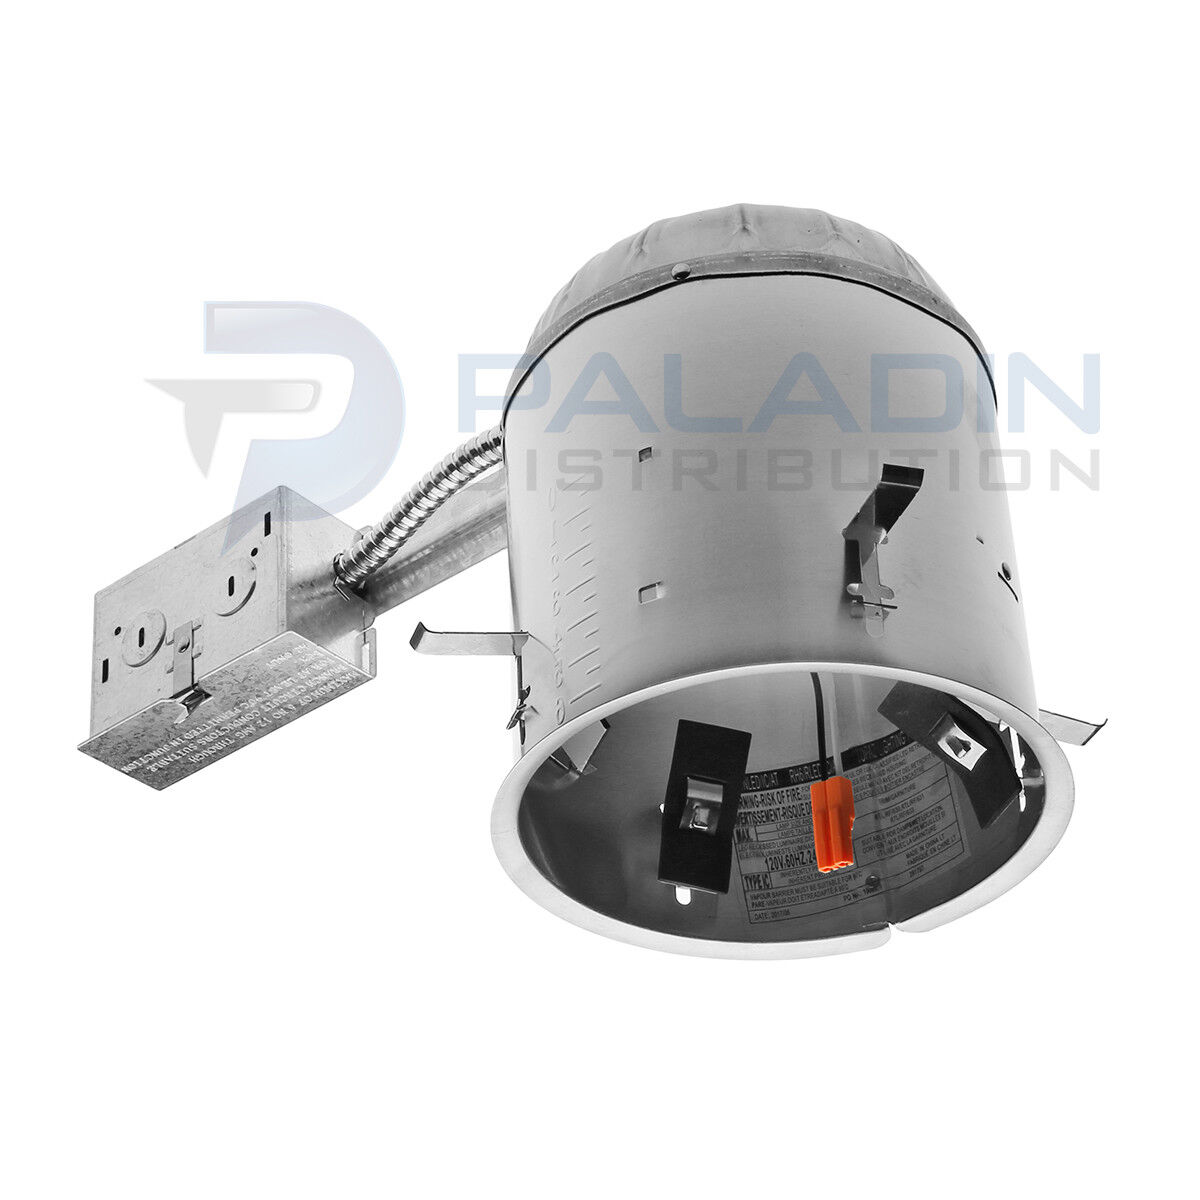 6" Inch Remodel Recessed Can Light Housing - IC Air Tight LED (12 Pack) Paladin 6-RM-12PK-LED - фотография #2